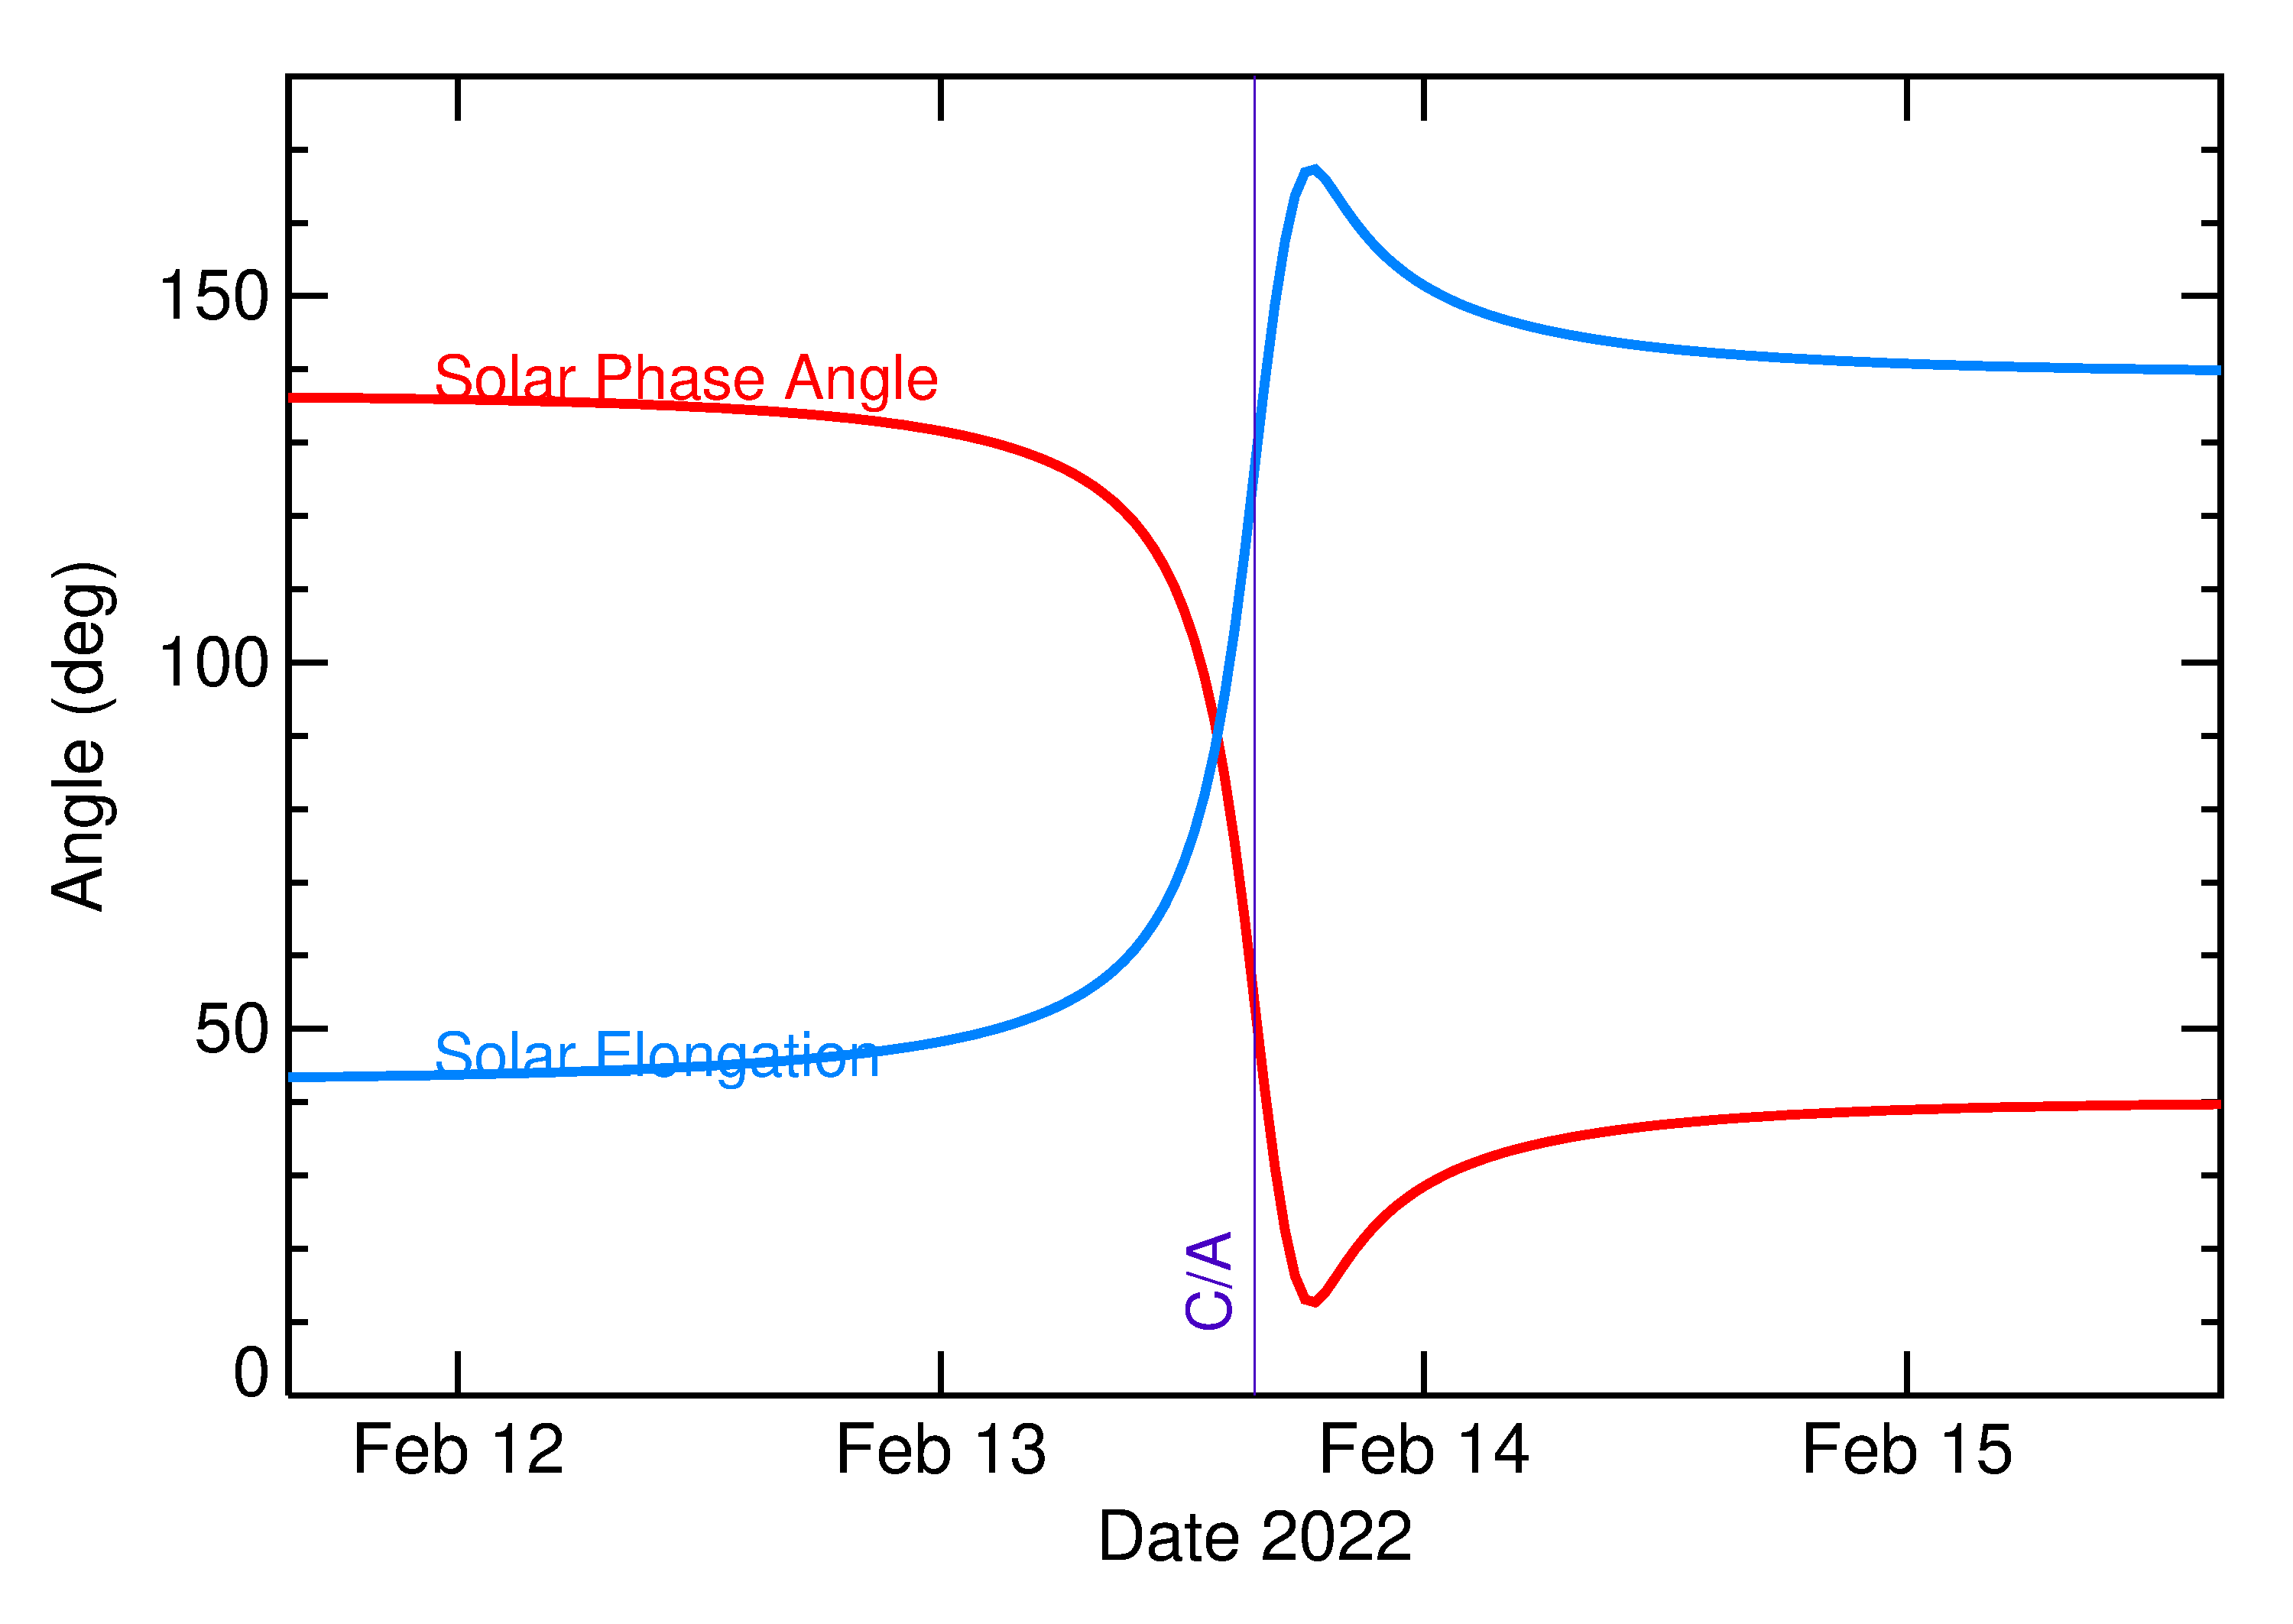 Solar Elongation and Solar Phase Angle of 2022 CL7 in the days around closest approach